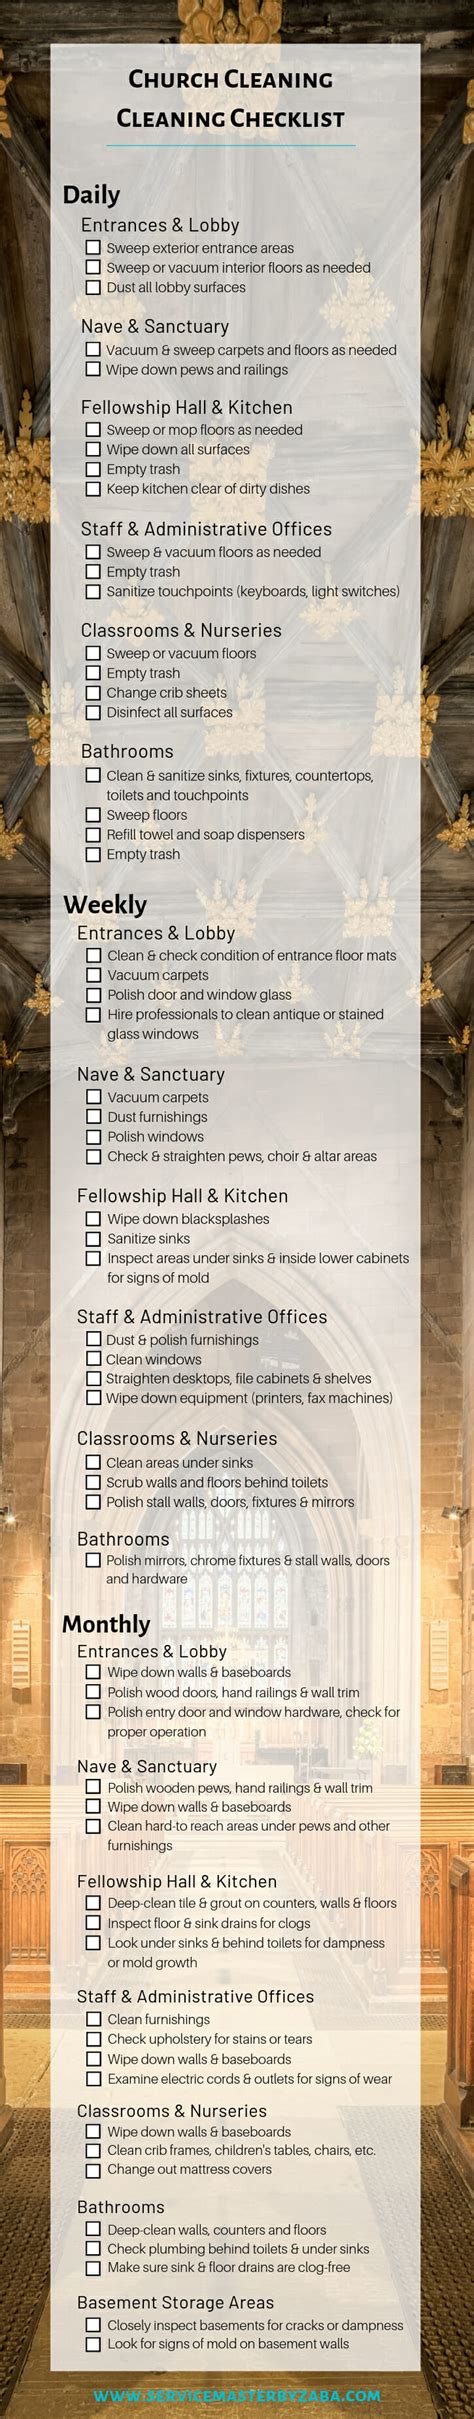 church cleaning checklist daily weekly monthly guidelines